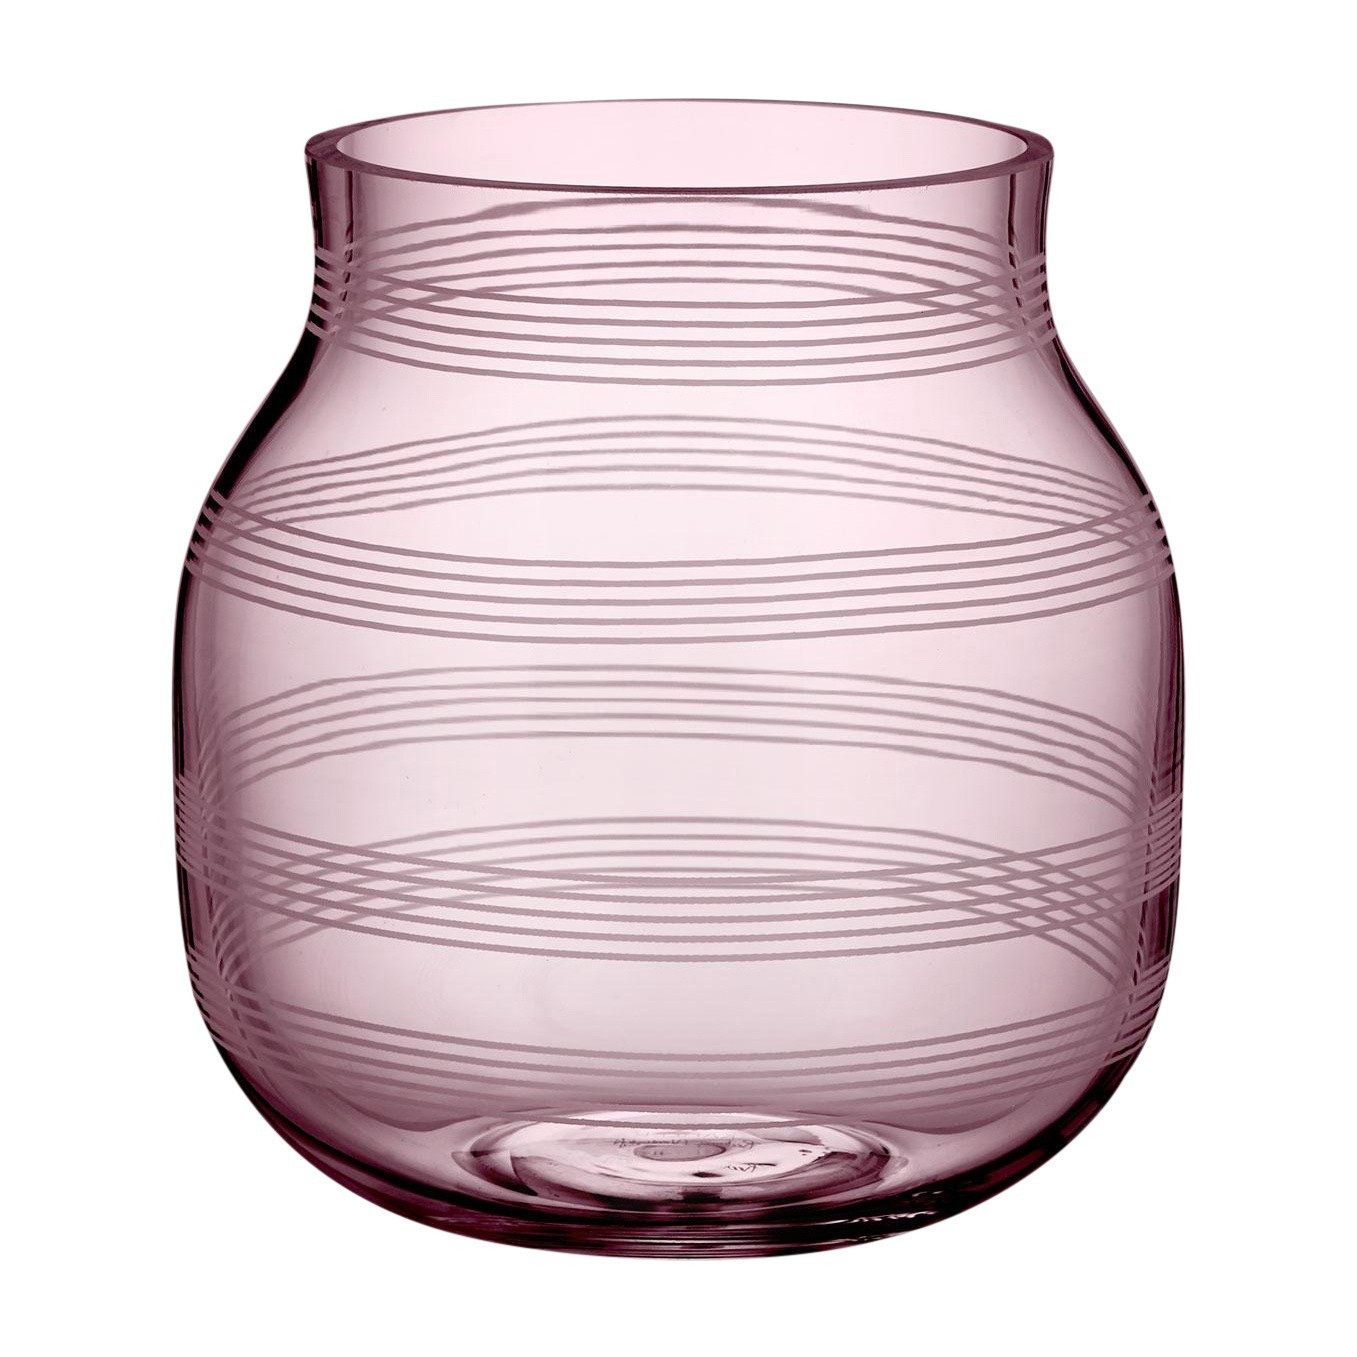 29 Lovable Different Types Of Glass Vases 2024 free download different types of glass vases of kac2a4hler omaggio glass vase h 17cm ambientedirect throughout kaehler omaggio glasvase h 17cm 1357x1357 id1922376 cdd758e4260a859ee9db9bec5014a957